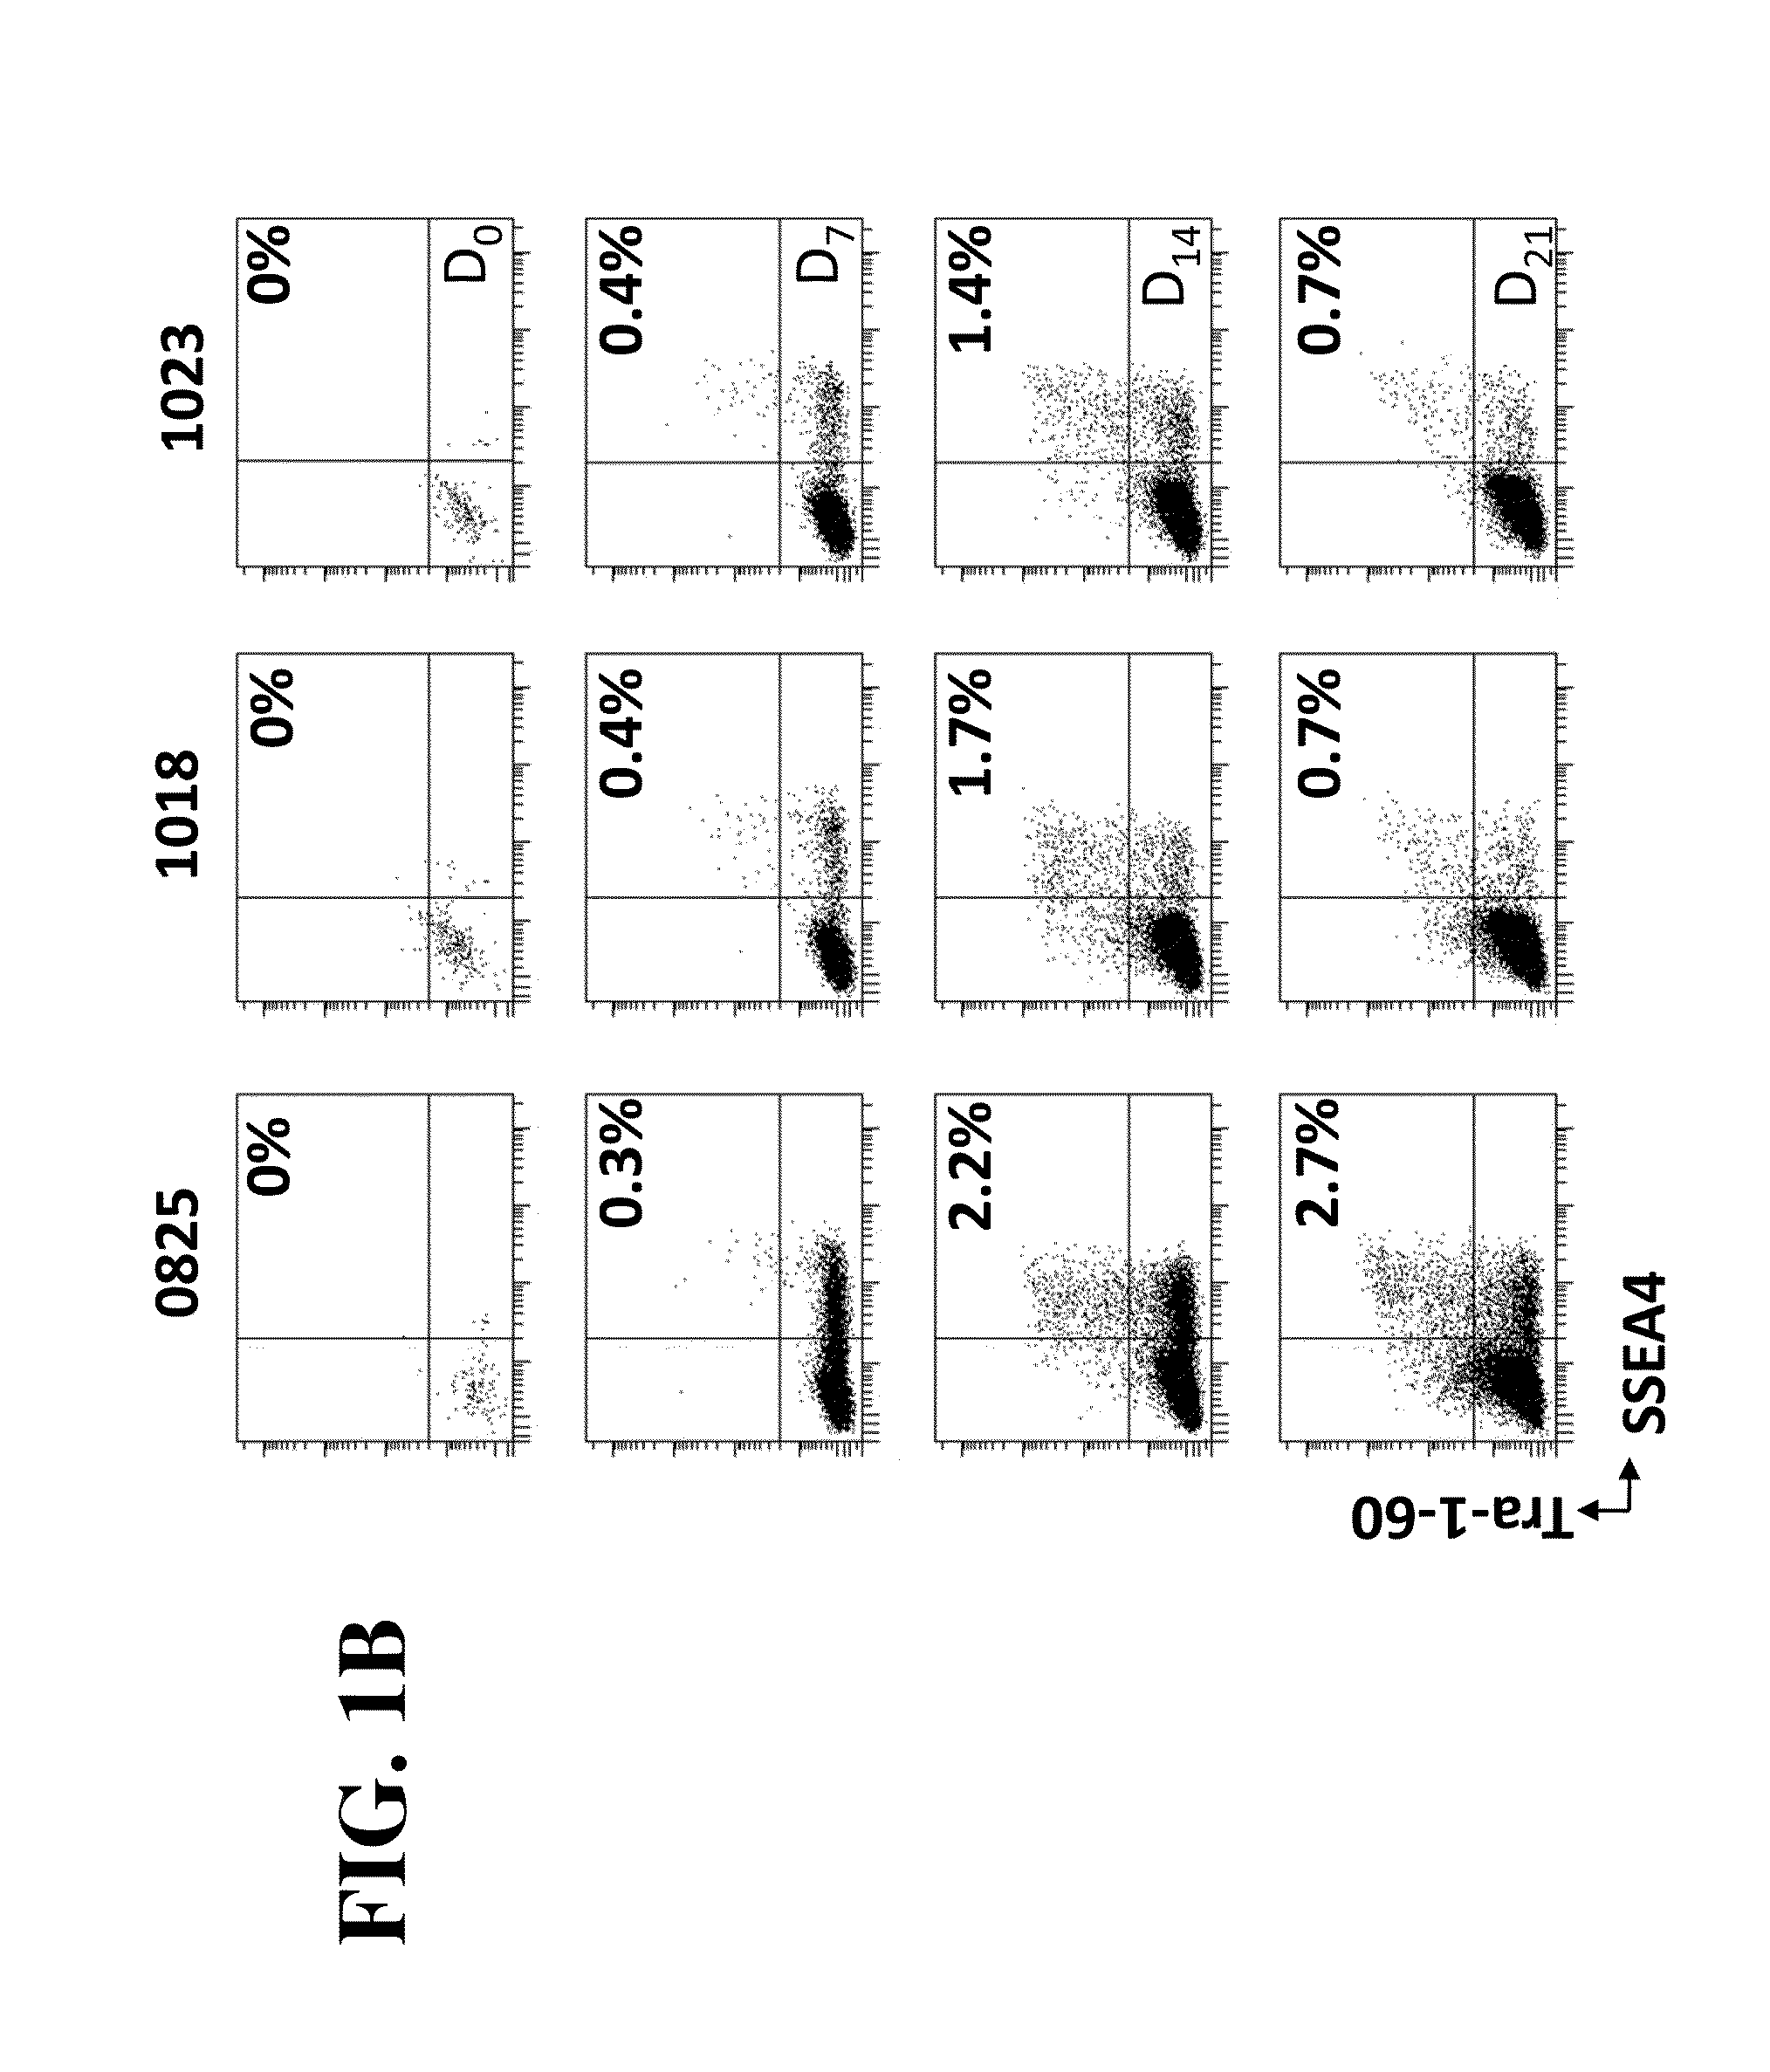 Methods for producing induced pluripotent stem cells